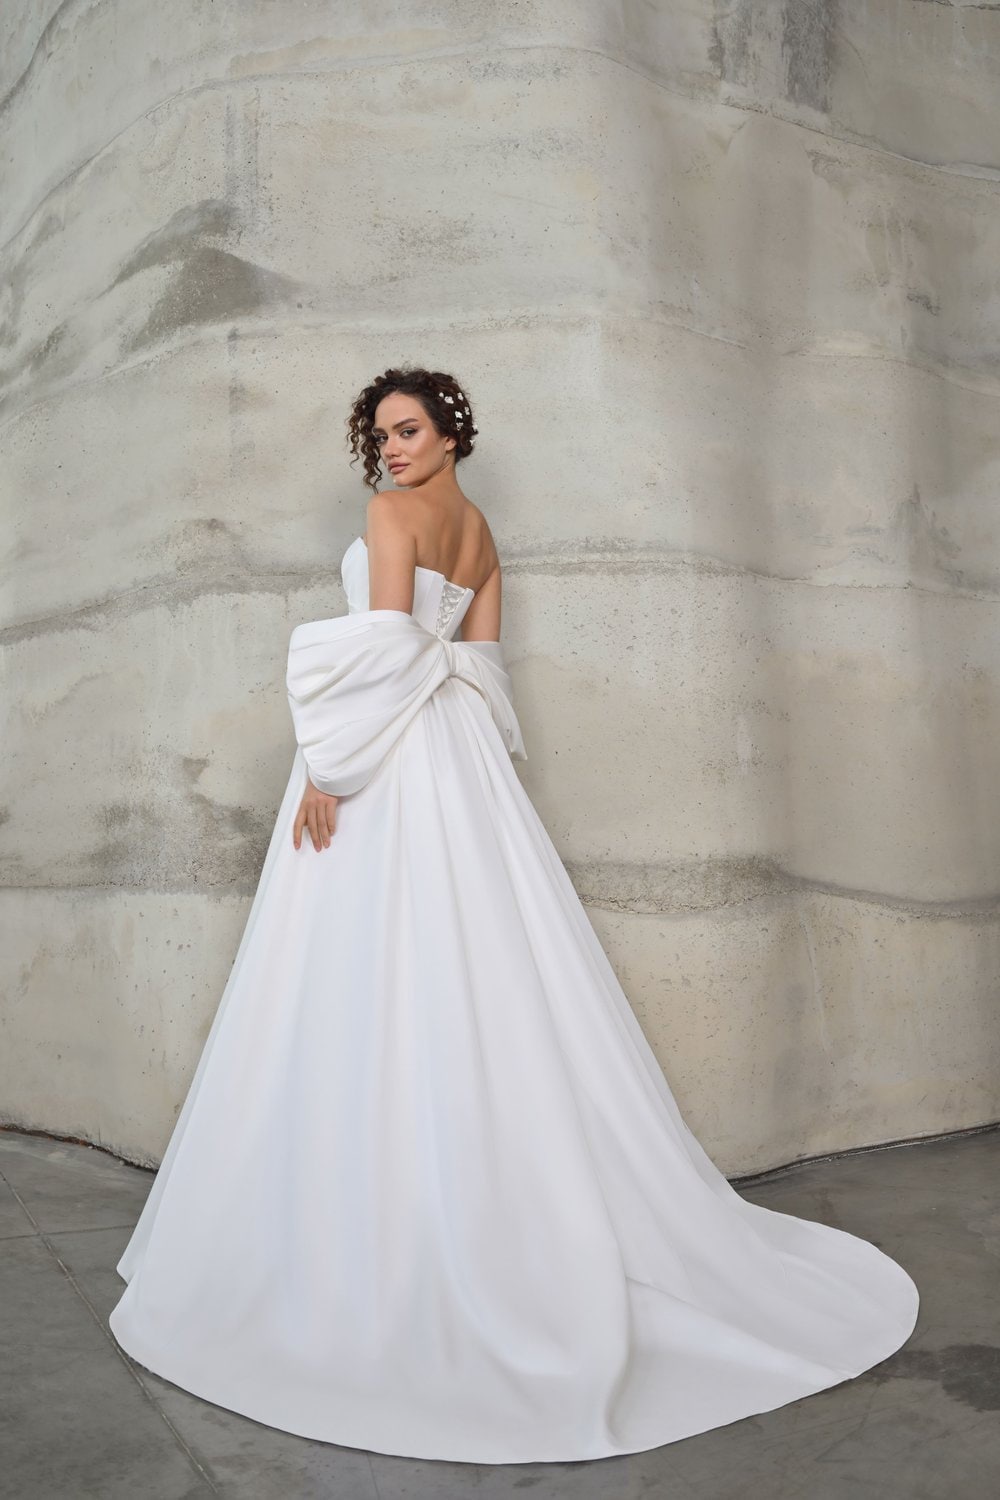 Minimalist Simple Off the Shoulder Back Bow Wedding Dress Bridal Gown Aline with Train Classic Design Side Slit Pleated Waist Strapless